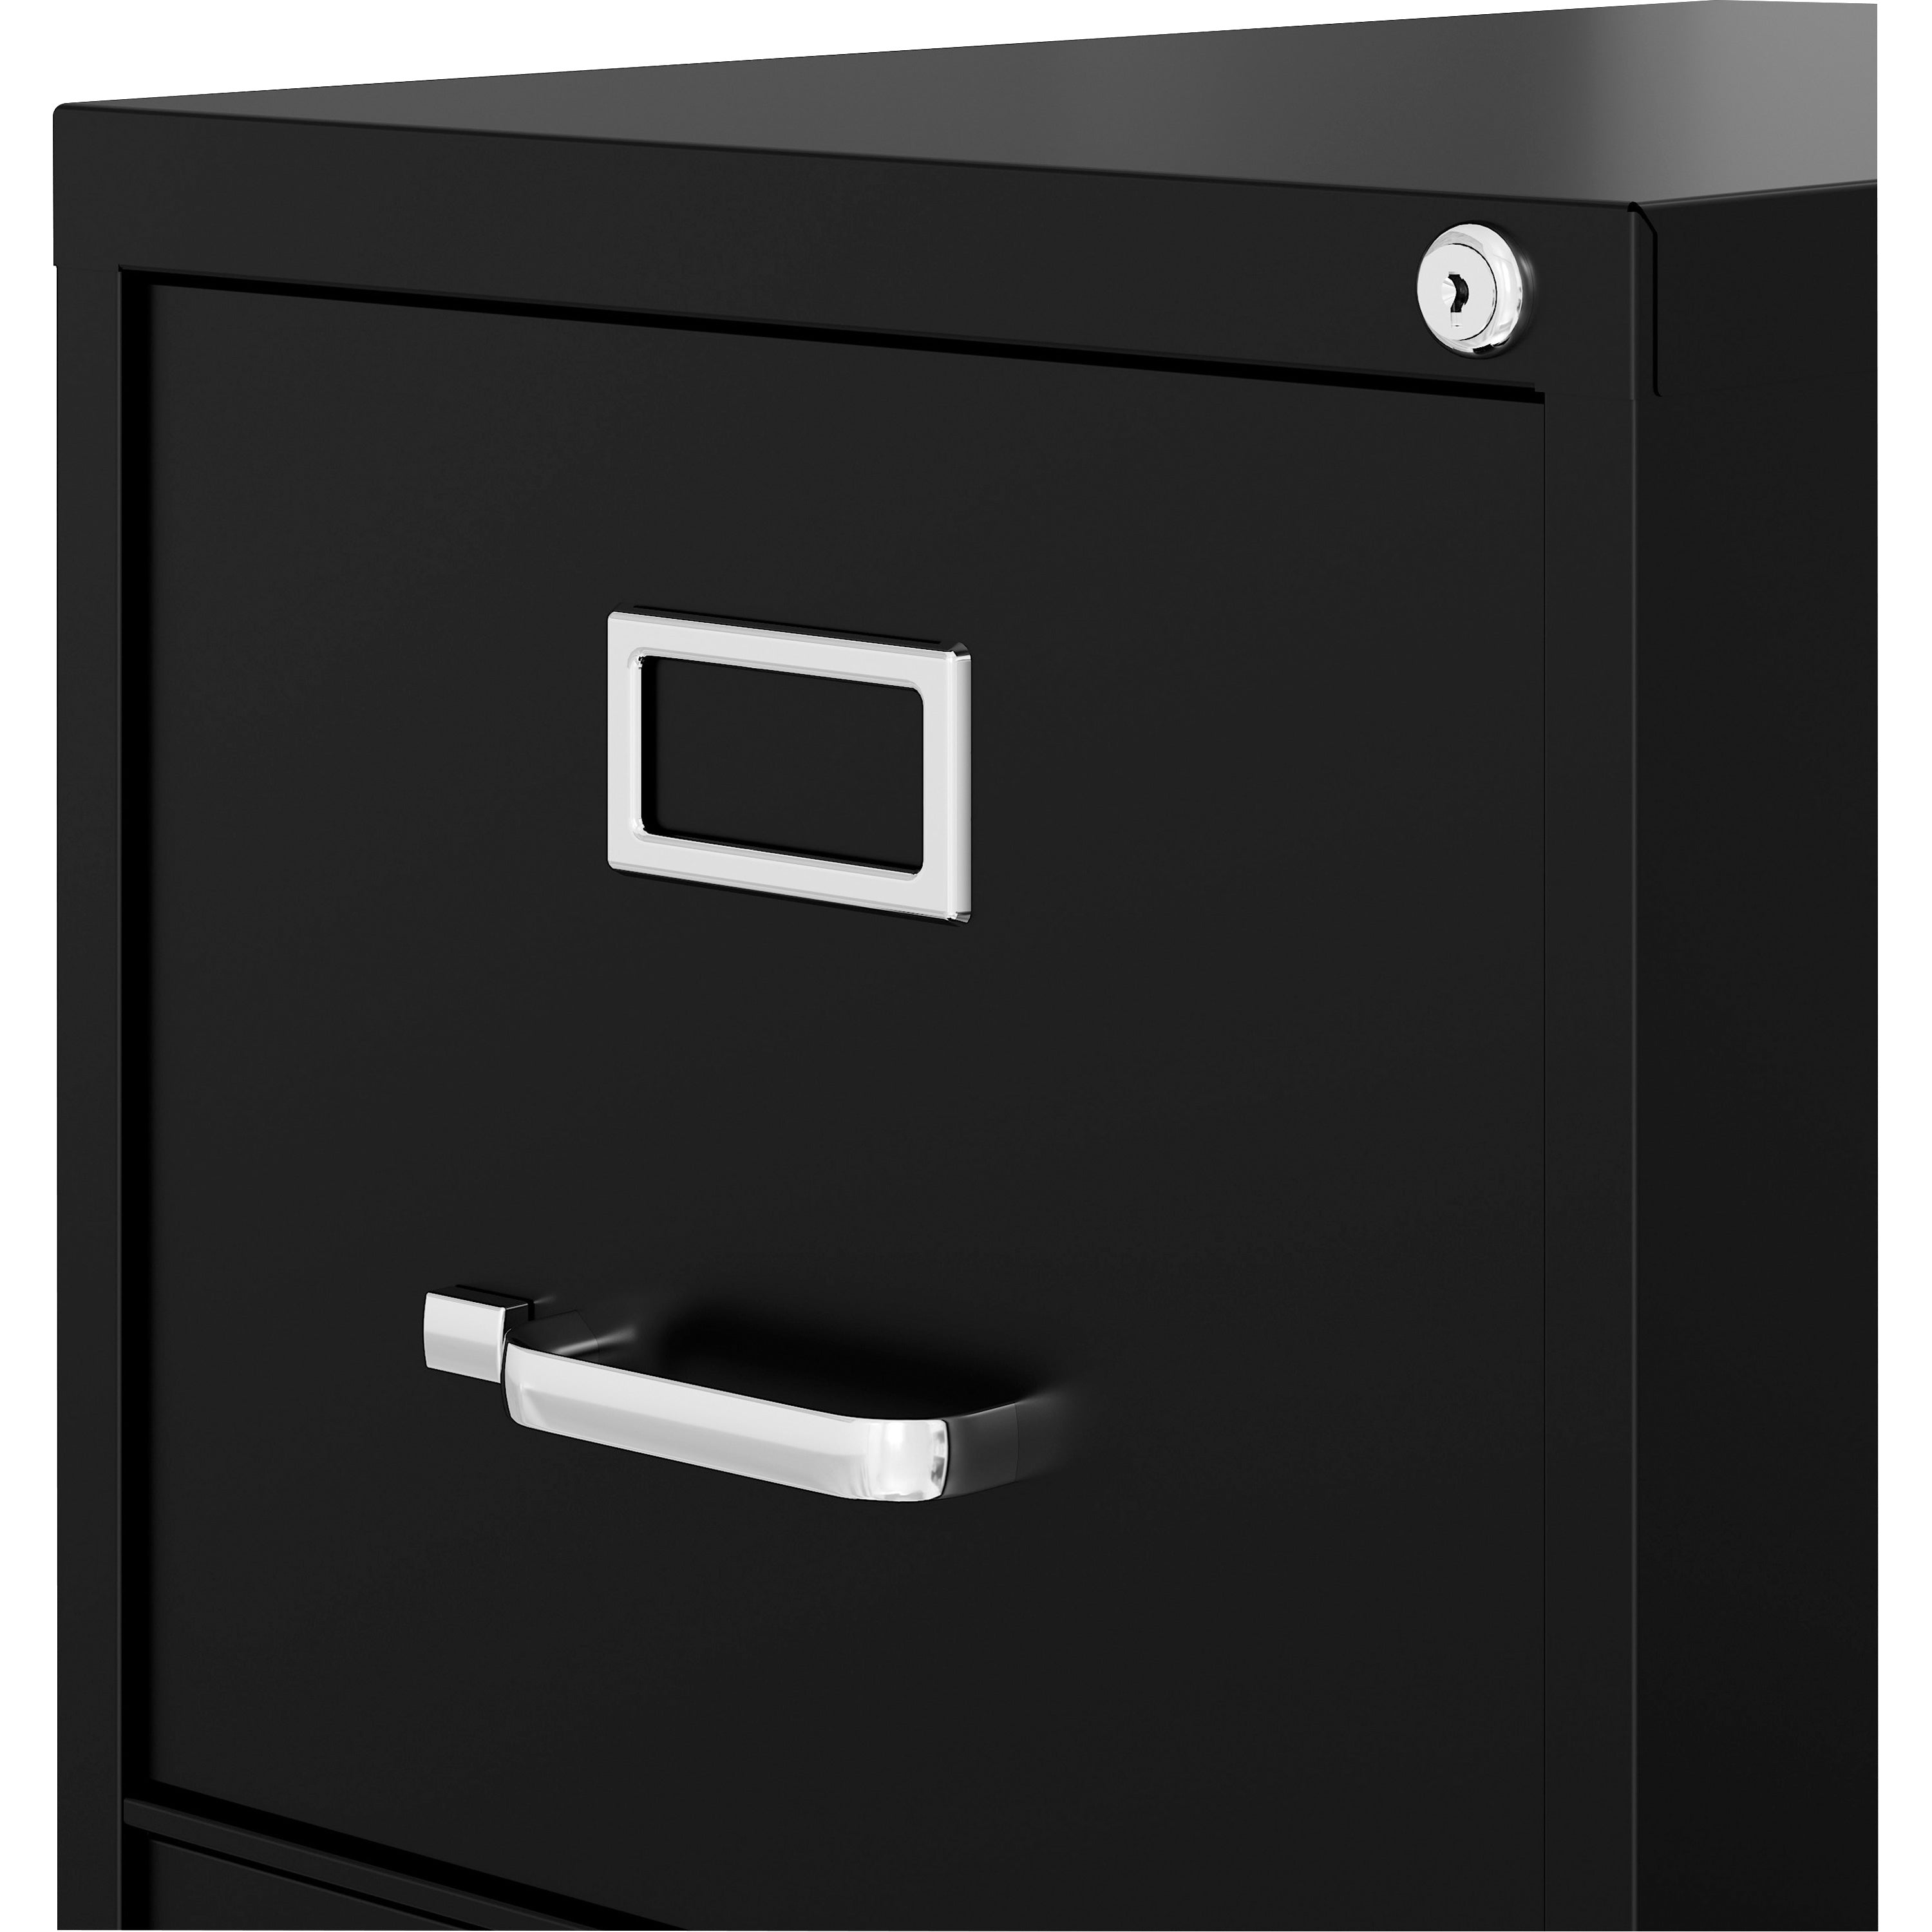 lorell-fortress-series-22-commercial-grade-vertical-file-cabinet-15-x-22-x-402-3-x-drawers-for-file-letter-vertical-ball-bearing-suspension-removable-lock-pull-handle-wire-management-black-steel-recycled_llr42297 - 5